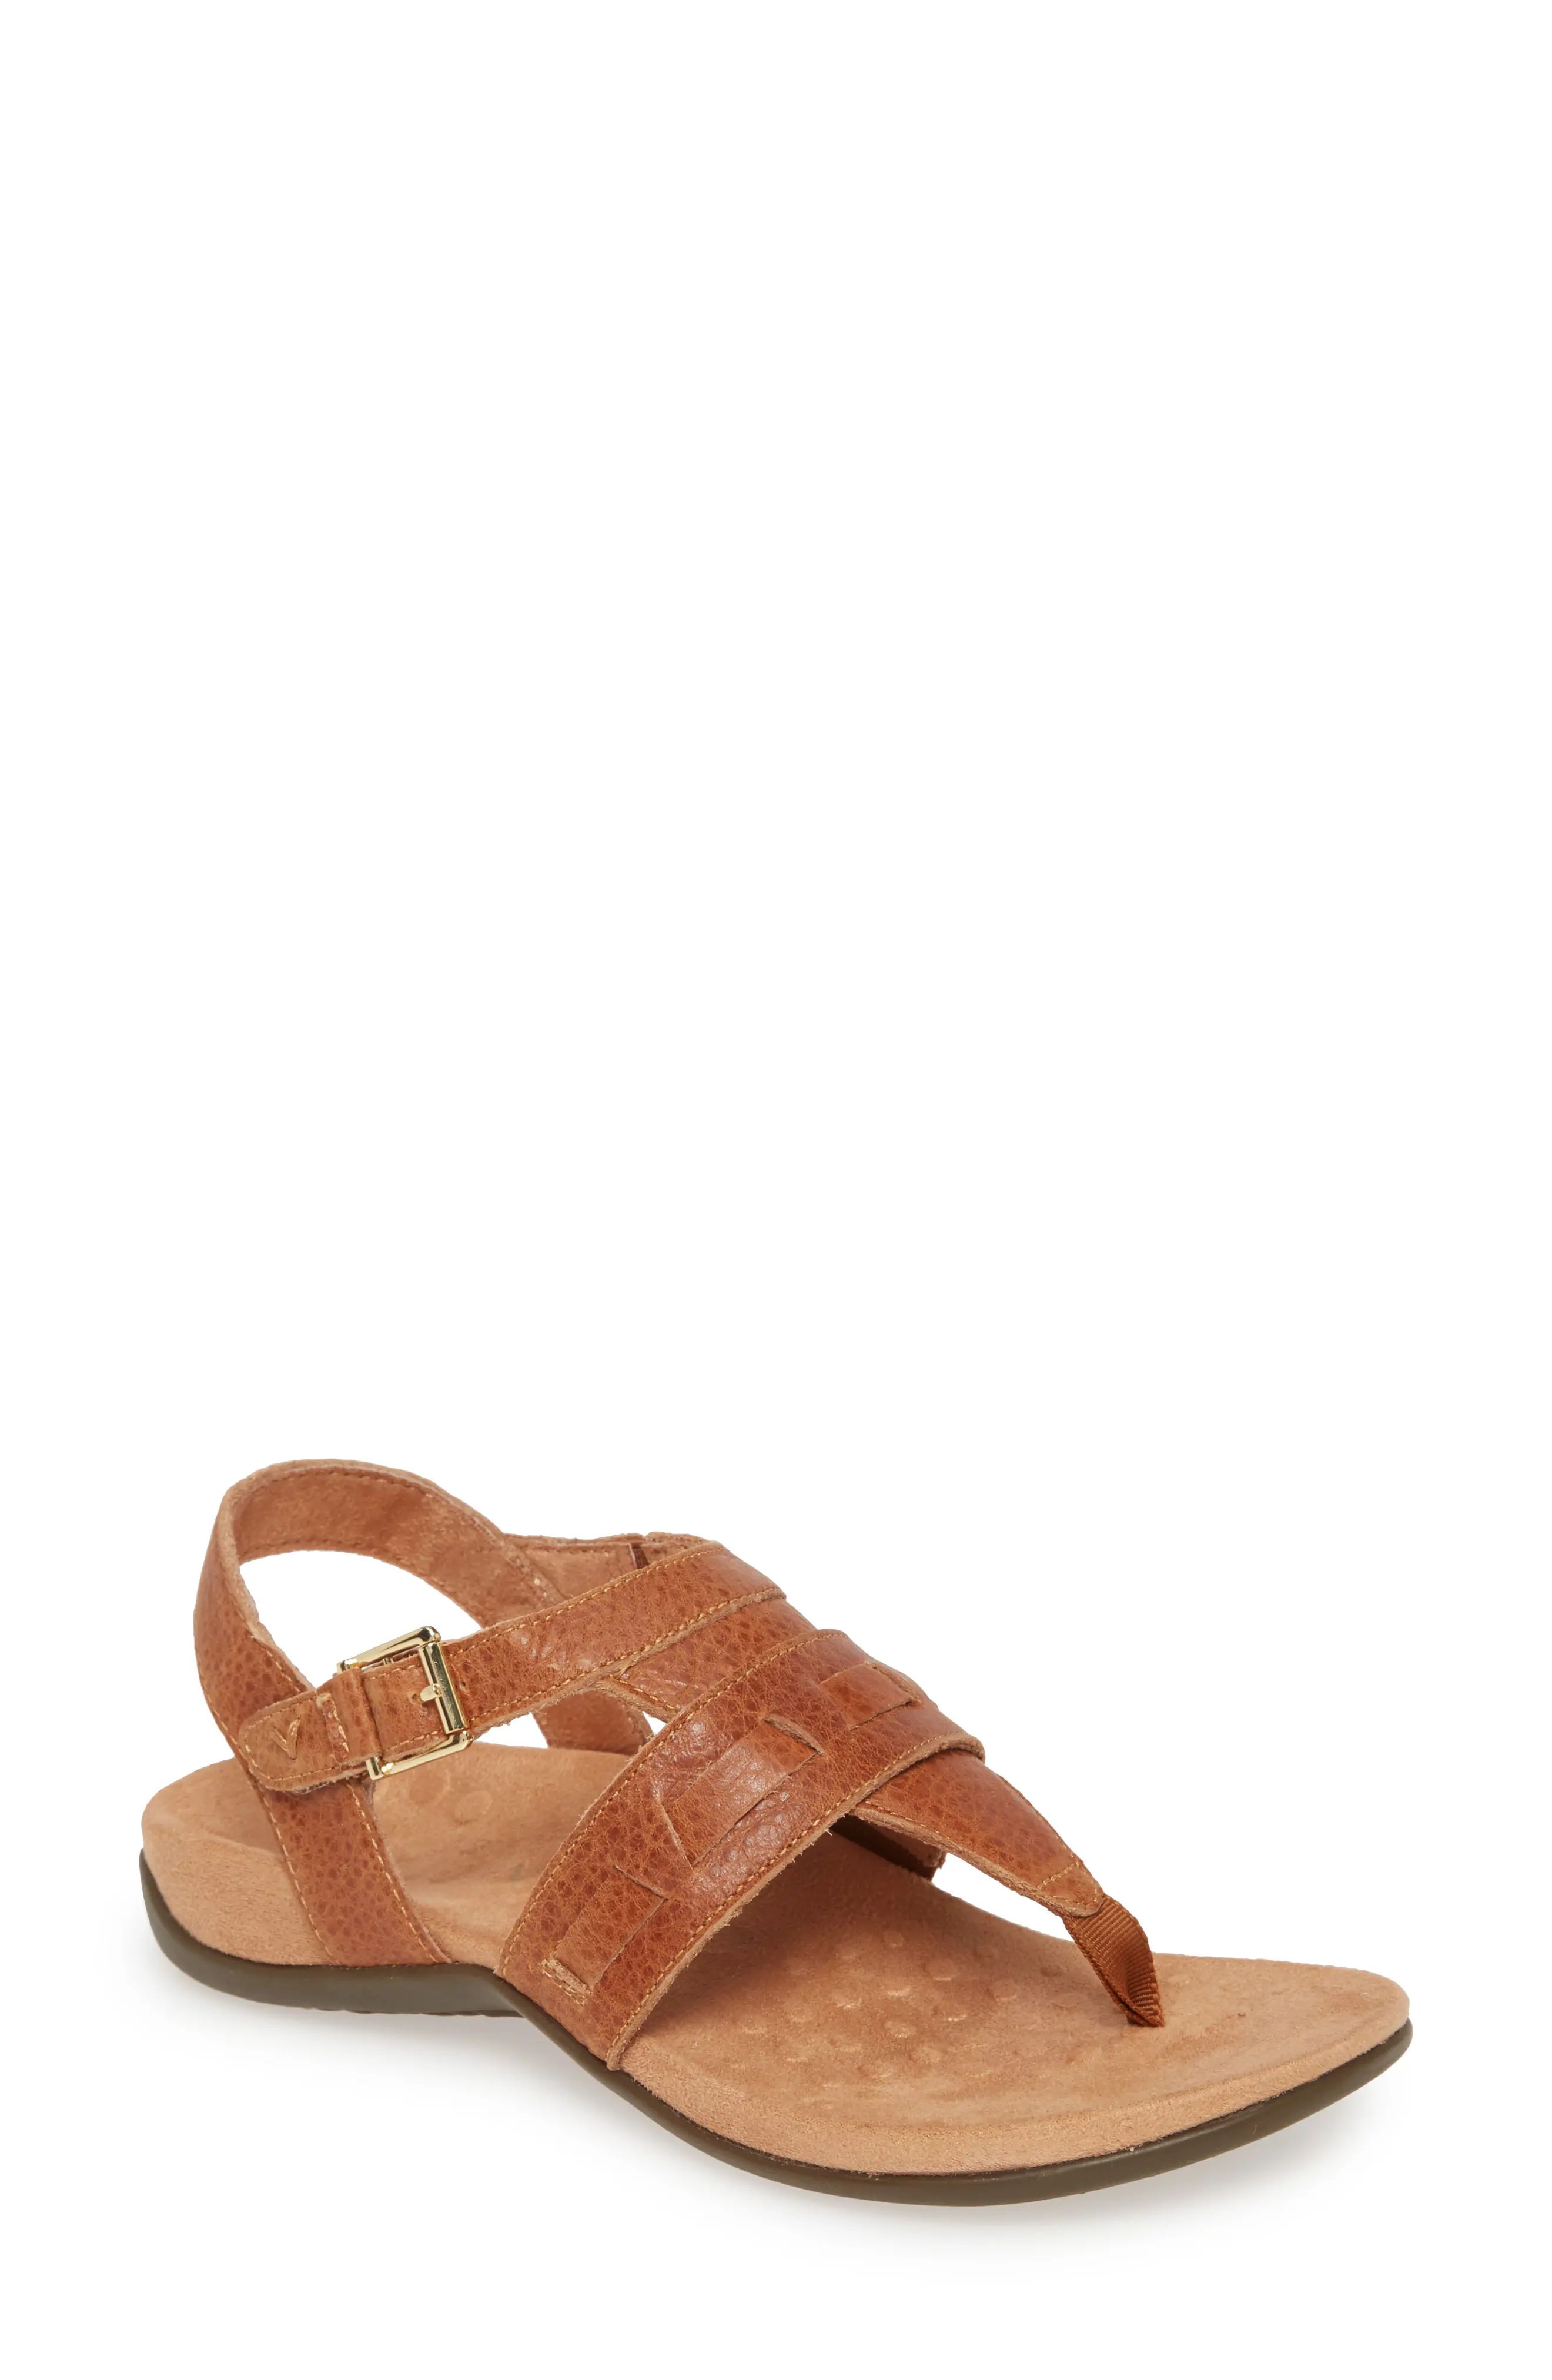 Women's Vionic Lupe Sandal, Size 10 M - Brown | Nordstrom